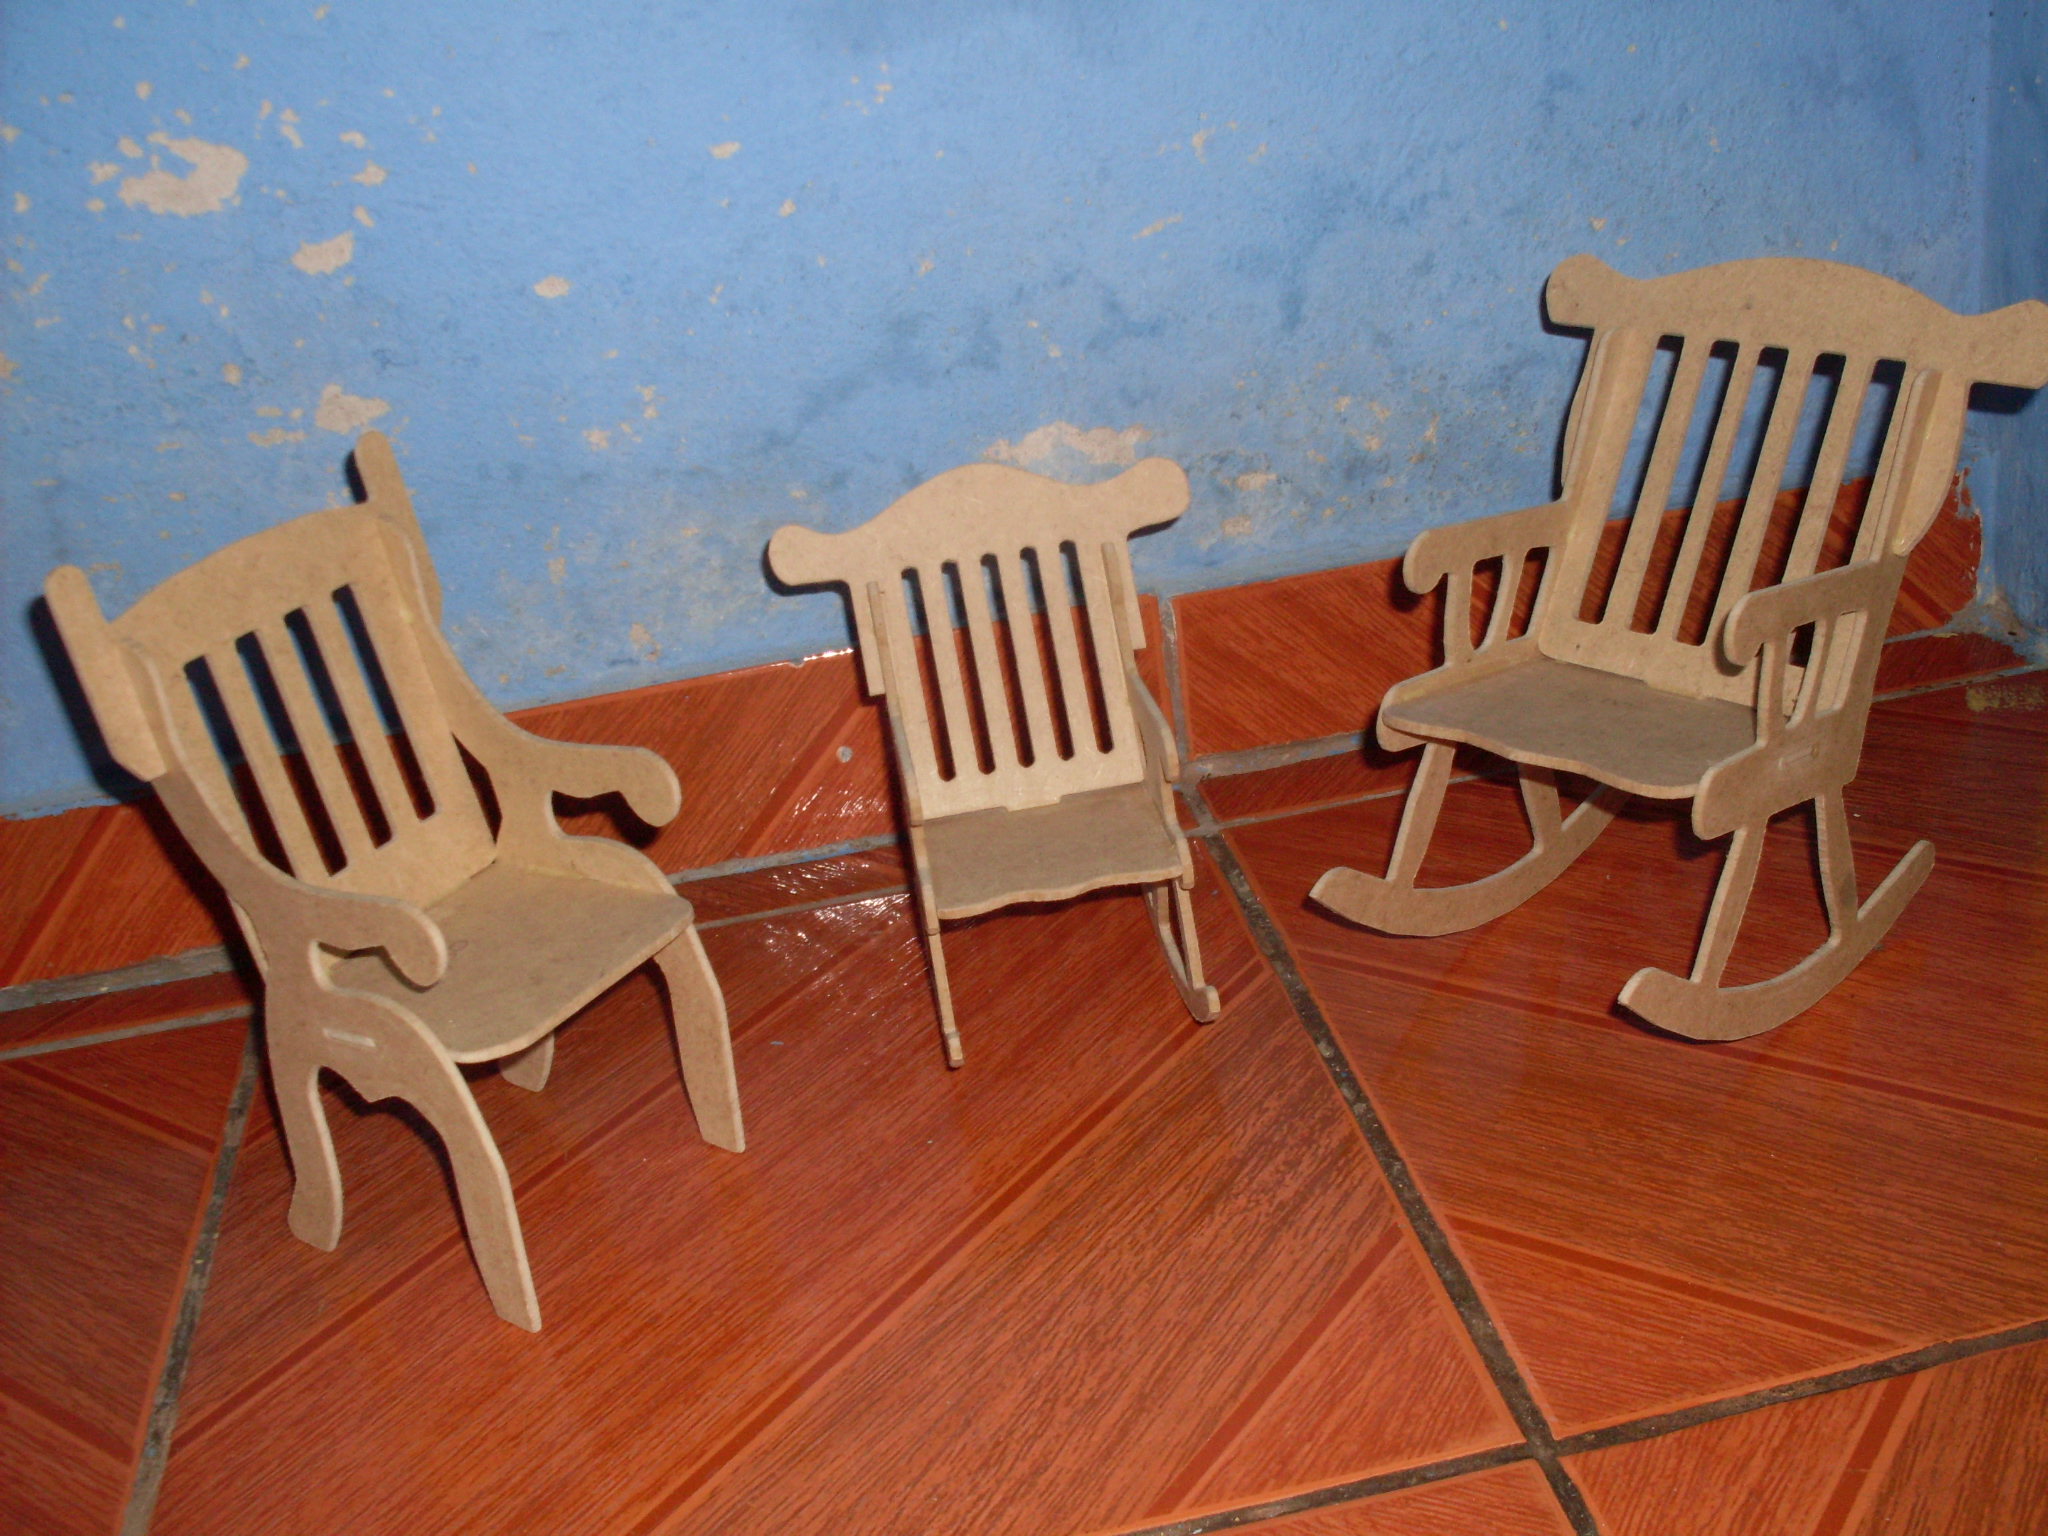 Chairs dxf File